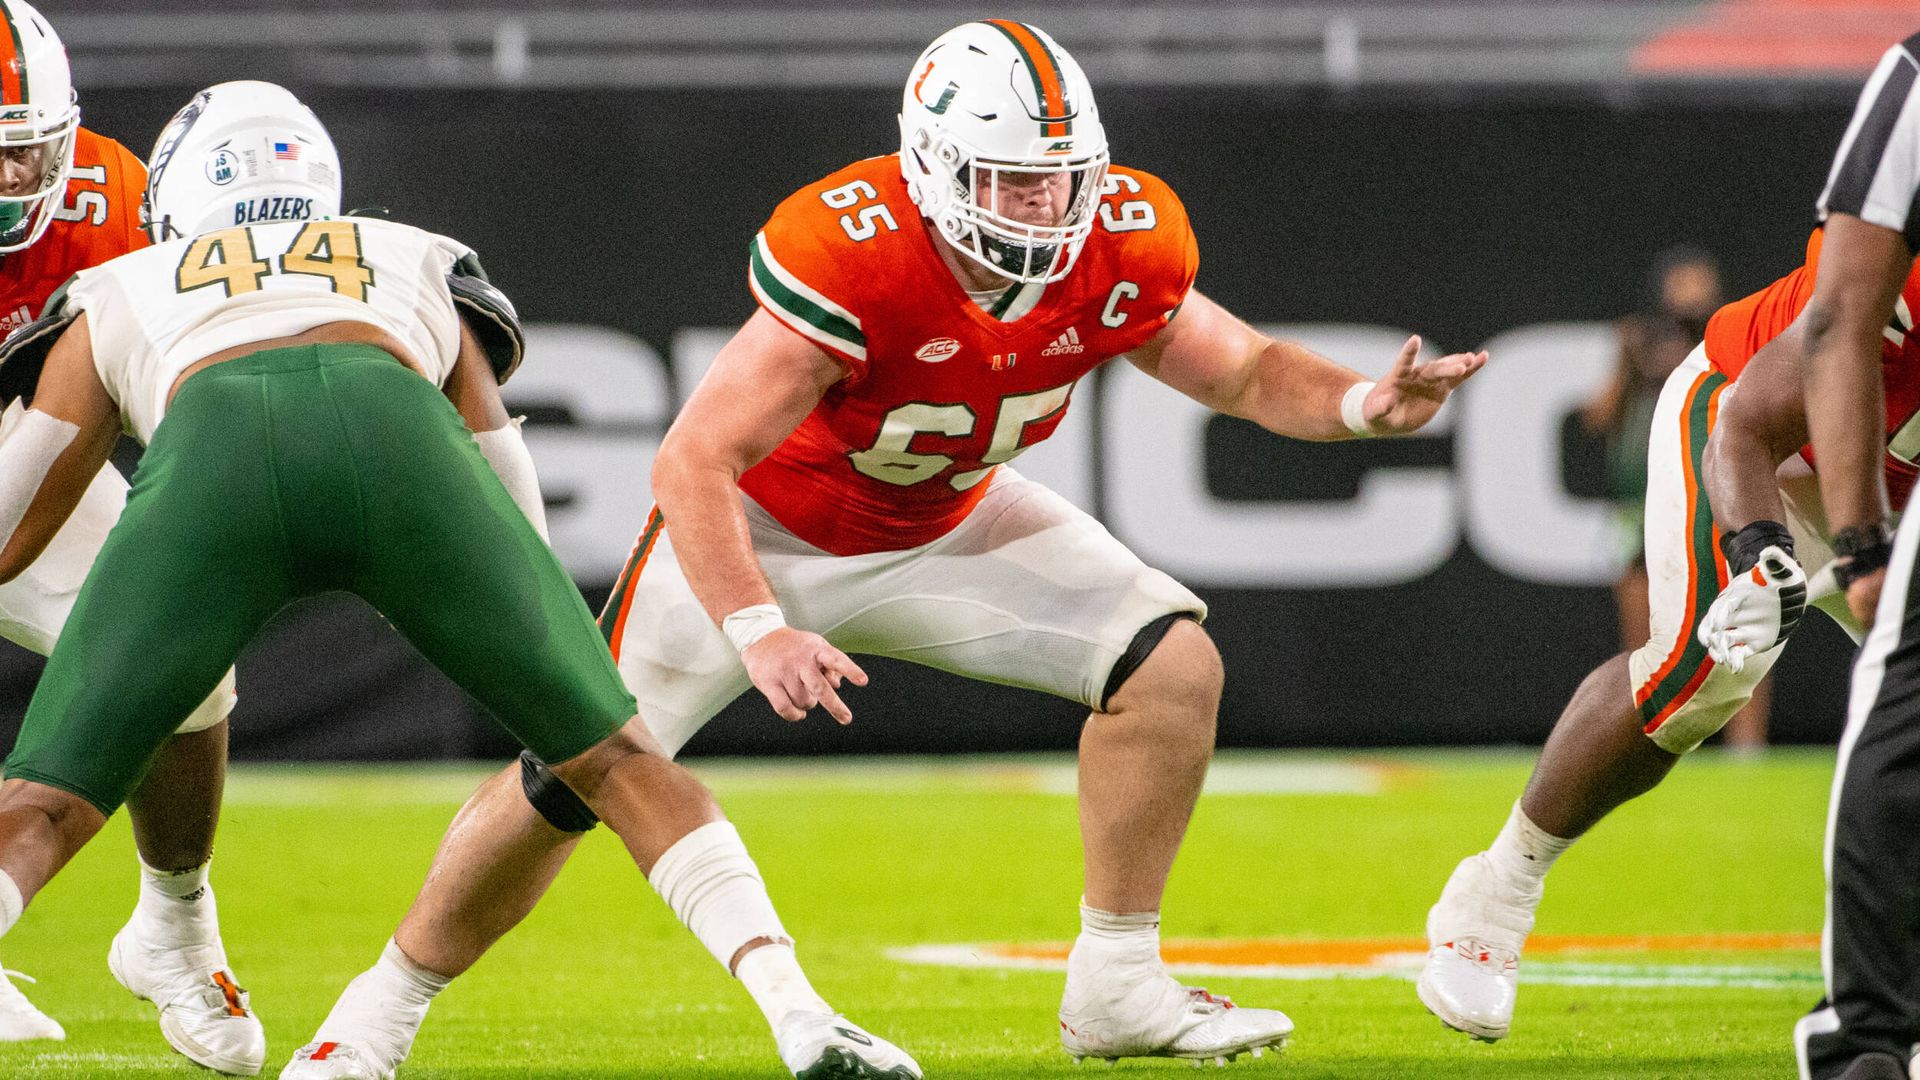 Gaynor Named ACC Offensive Lineman of the Week